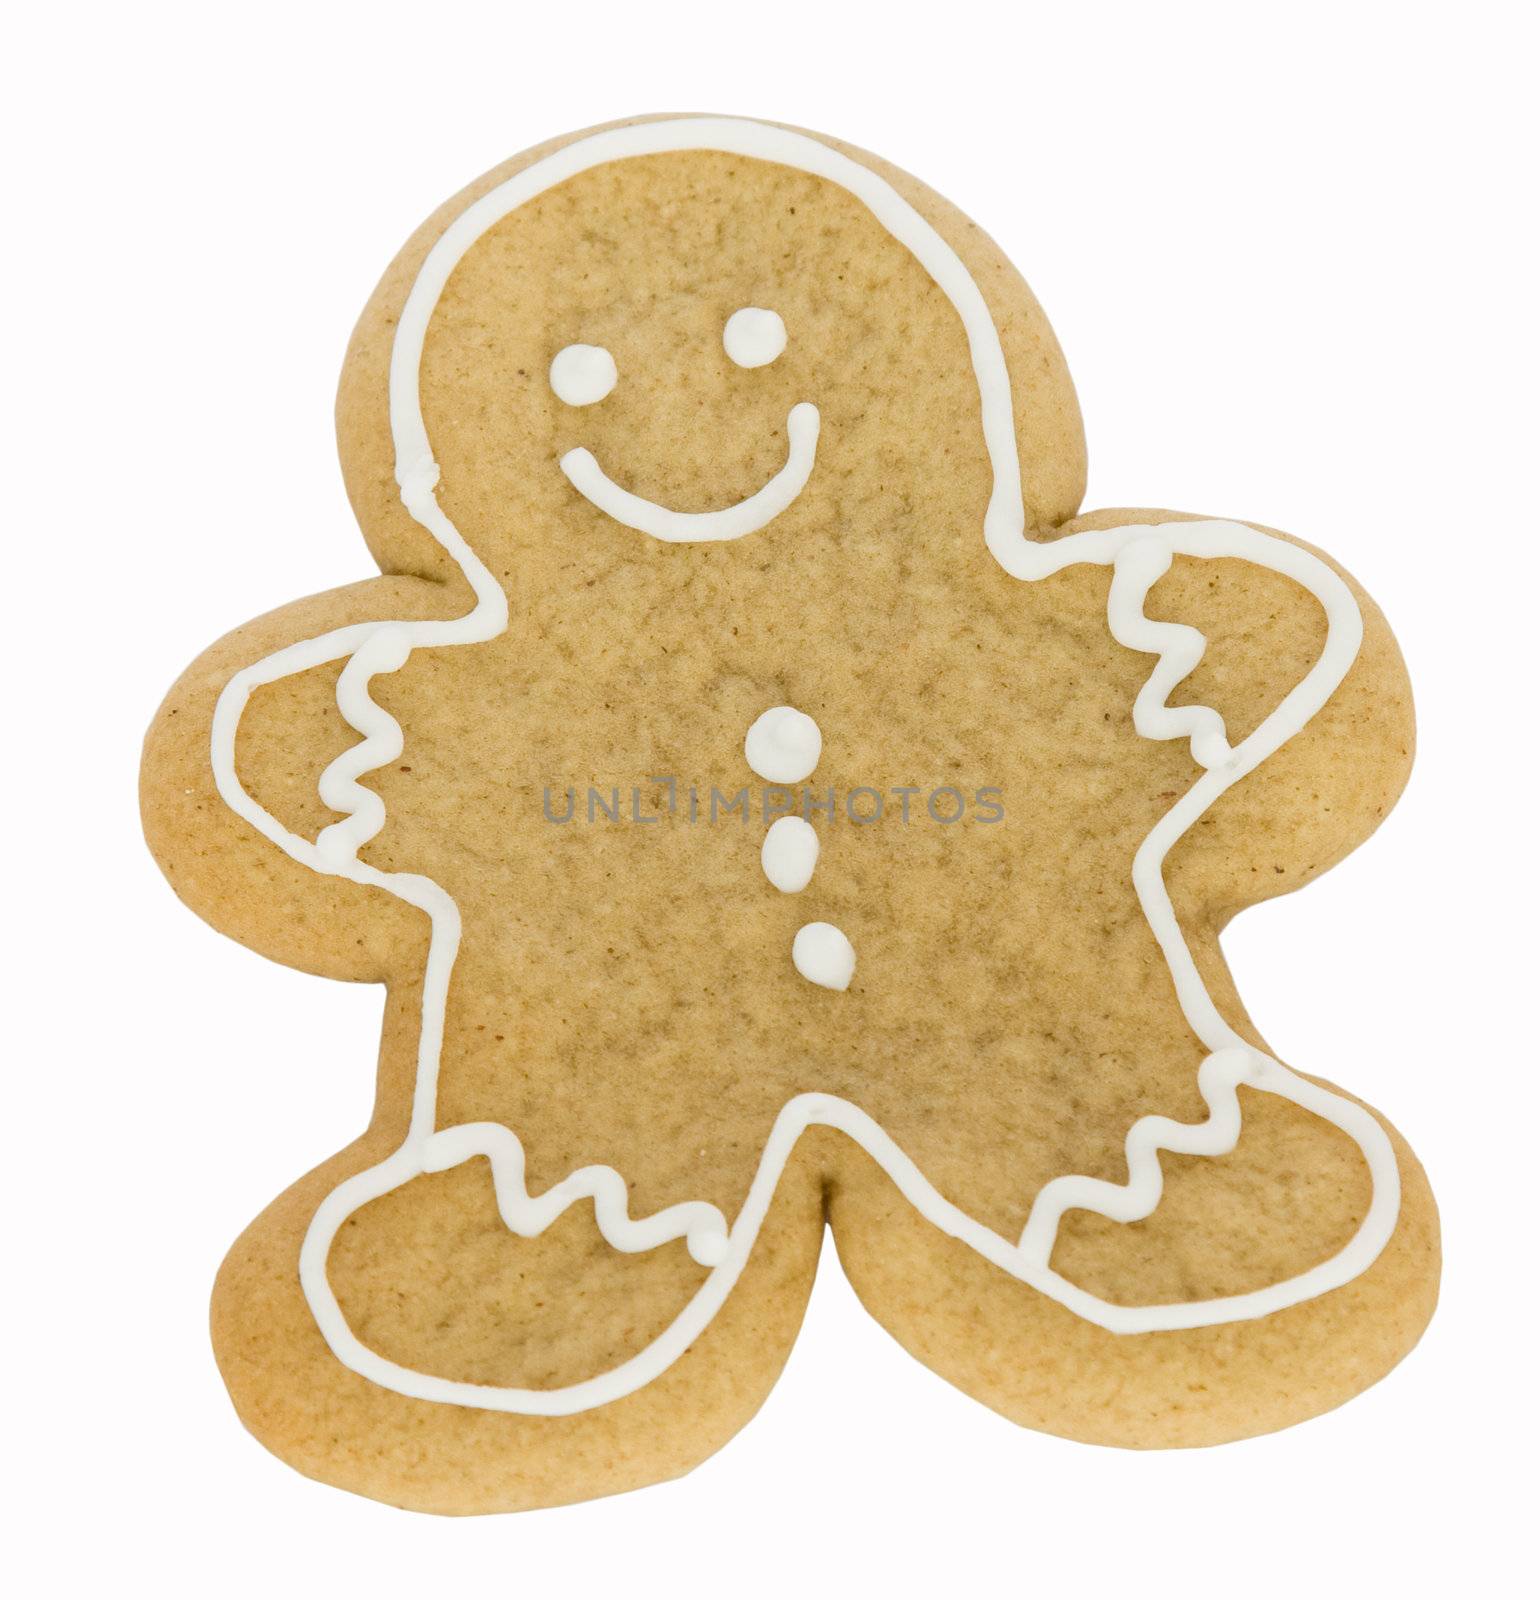 Gingerbread man decorated with white icing isolated against white